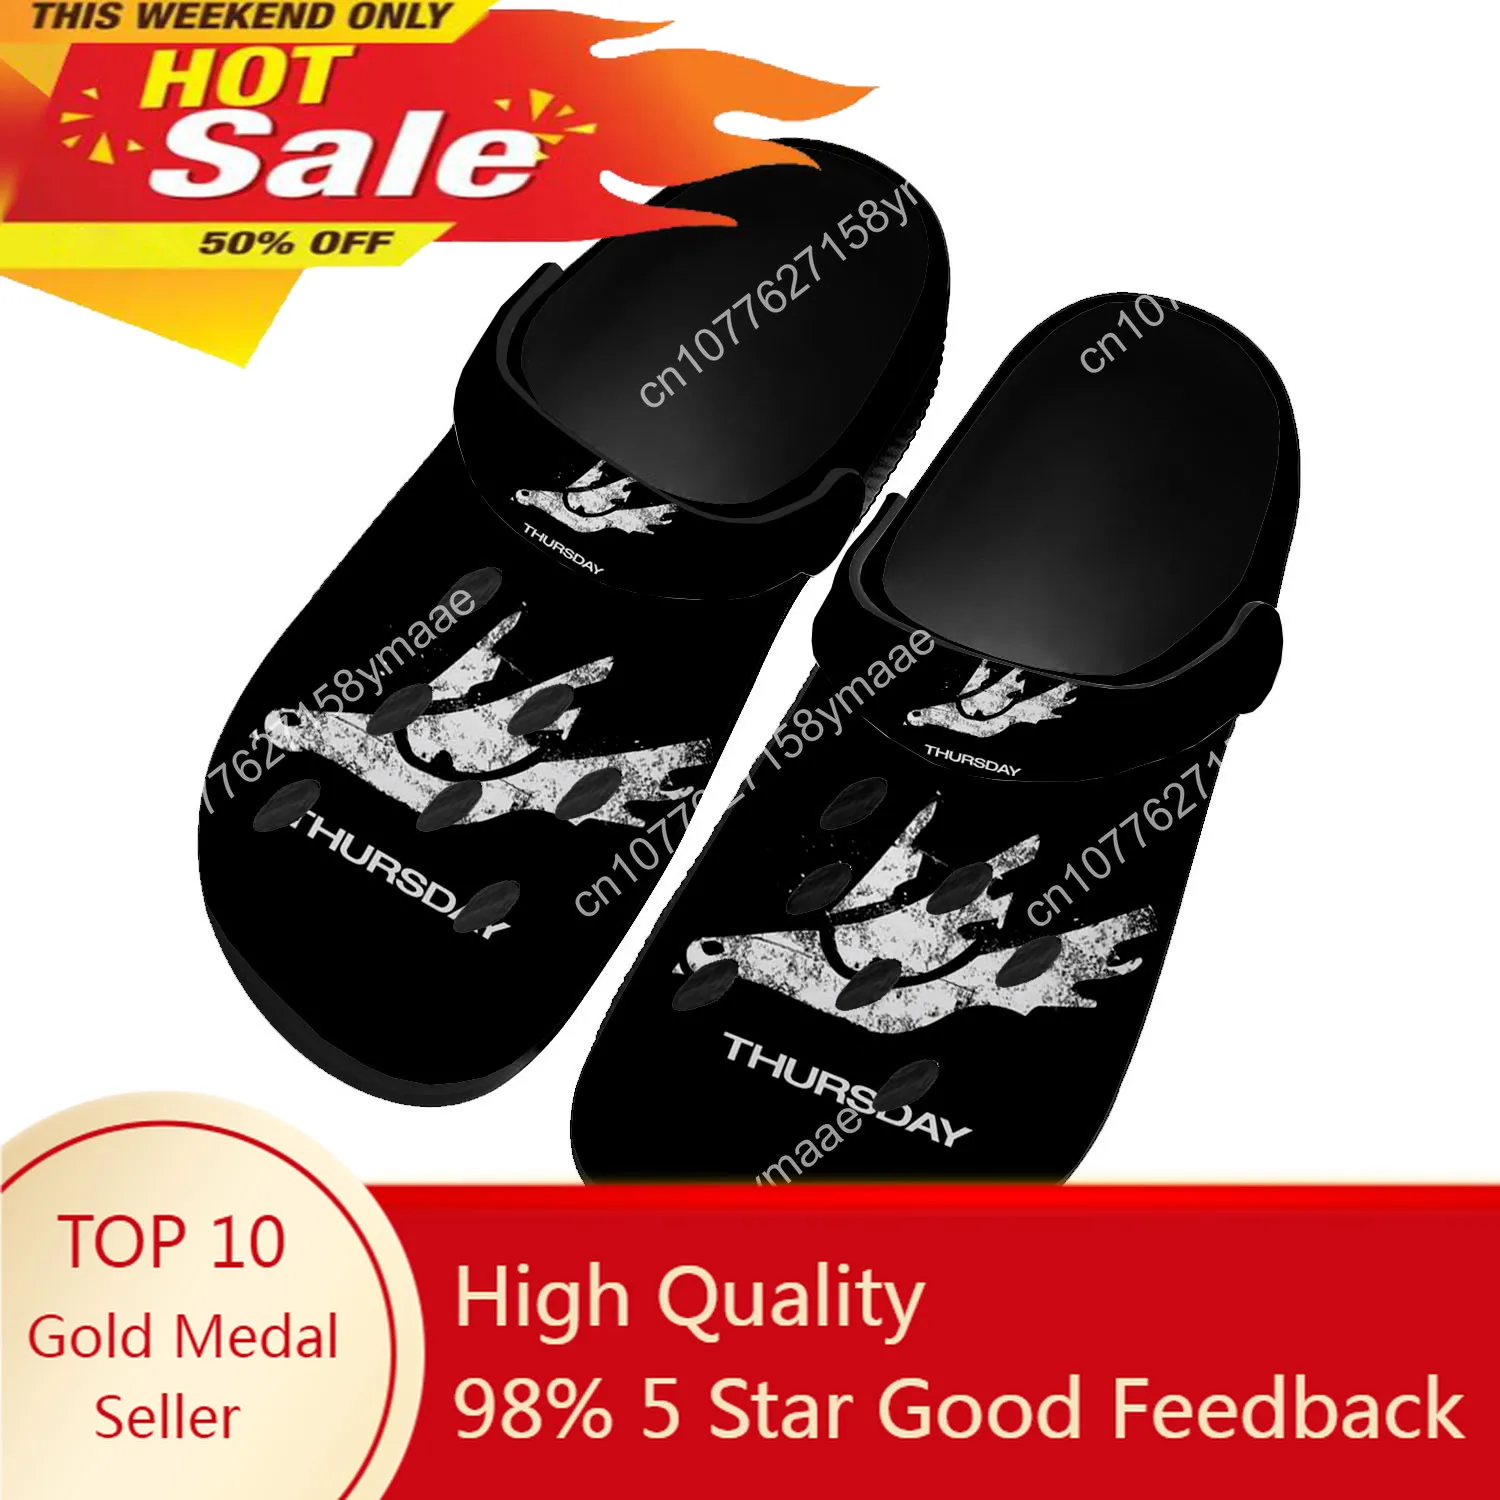 

Thursday Band Home Clog Mens Women Teenager Sandals Shoes Garden Bespoke Customized Breathable Shoe Beach Hole Slippers Black